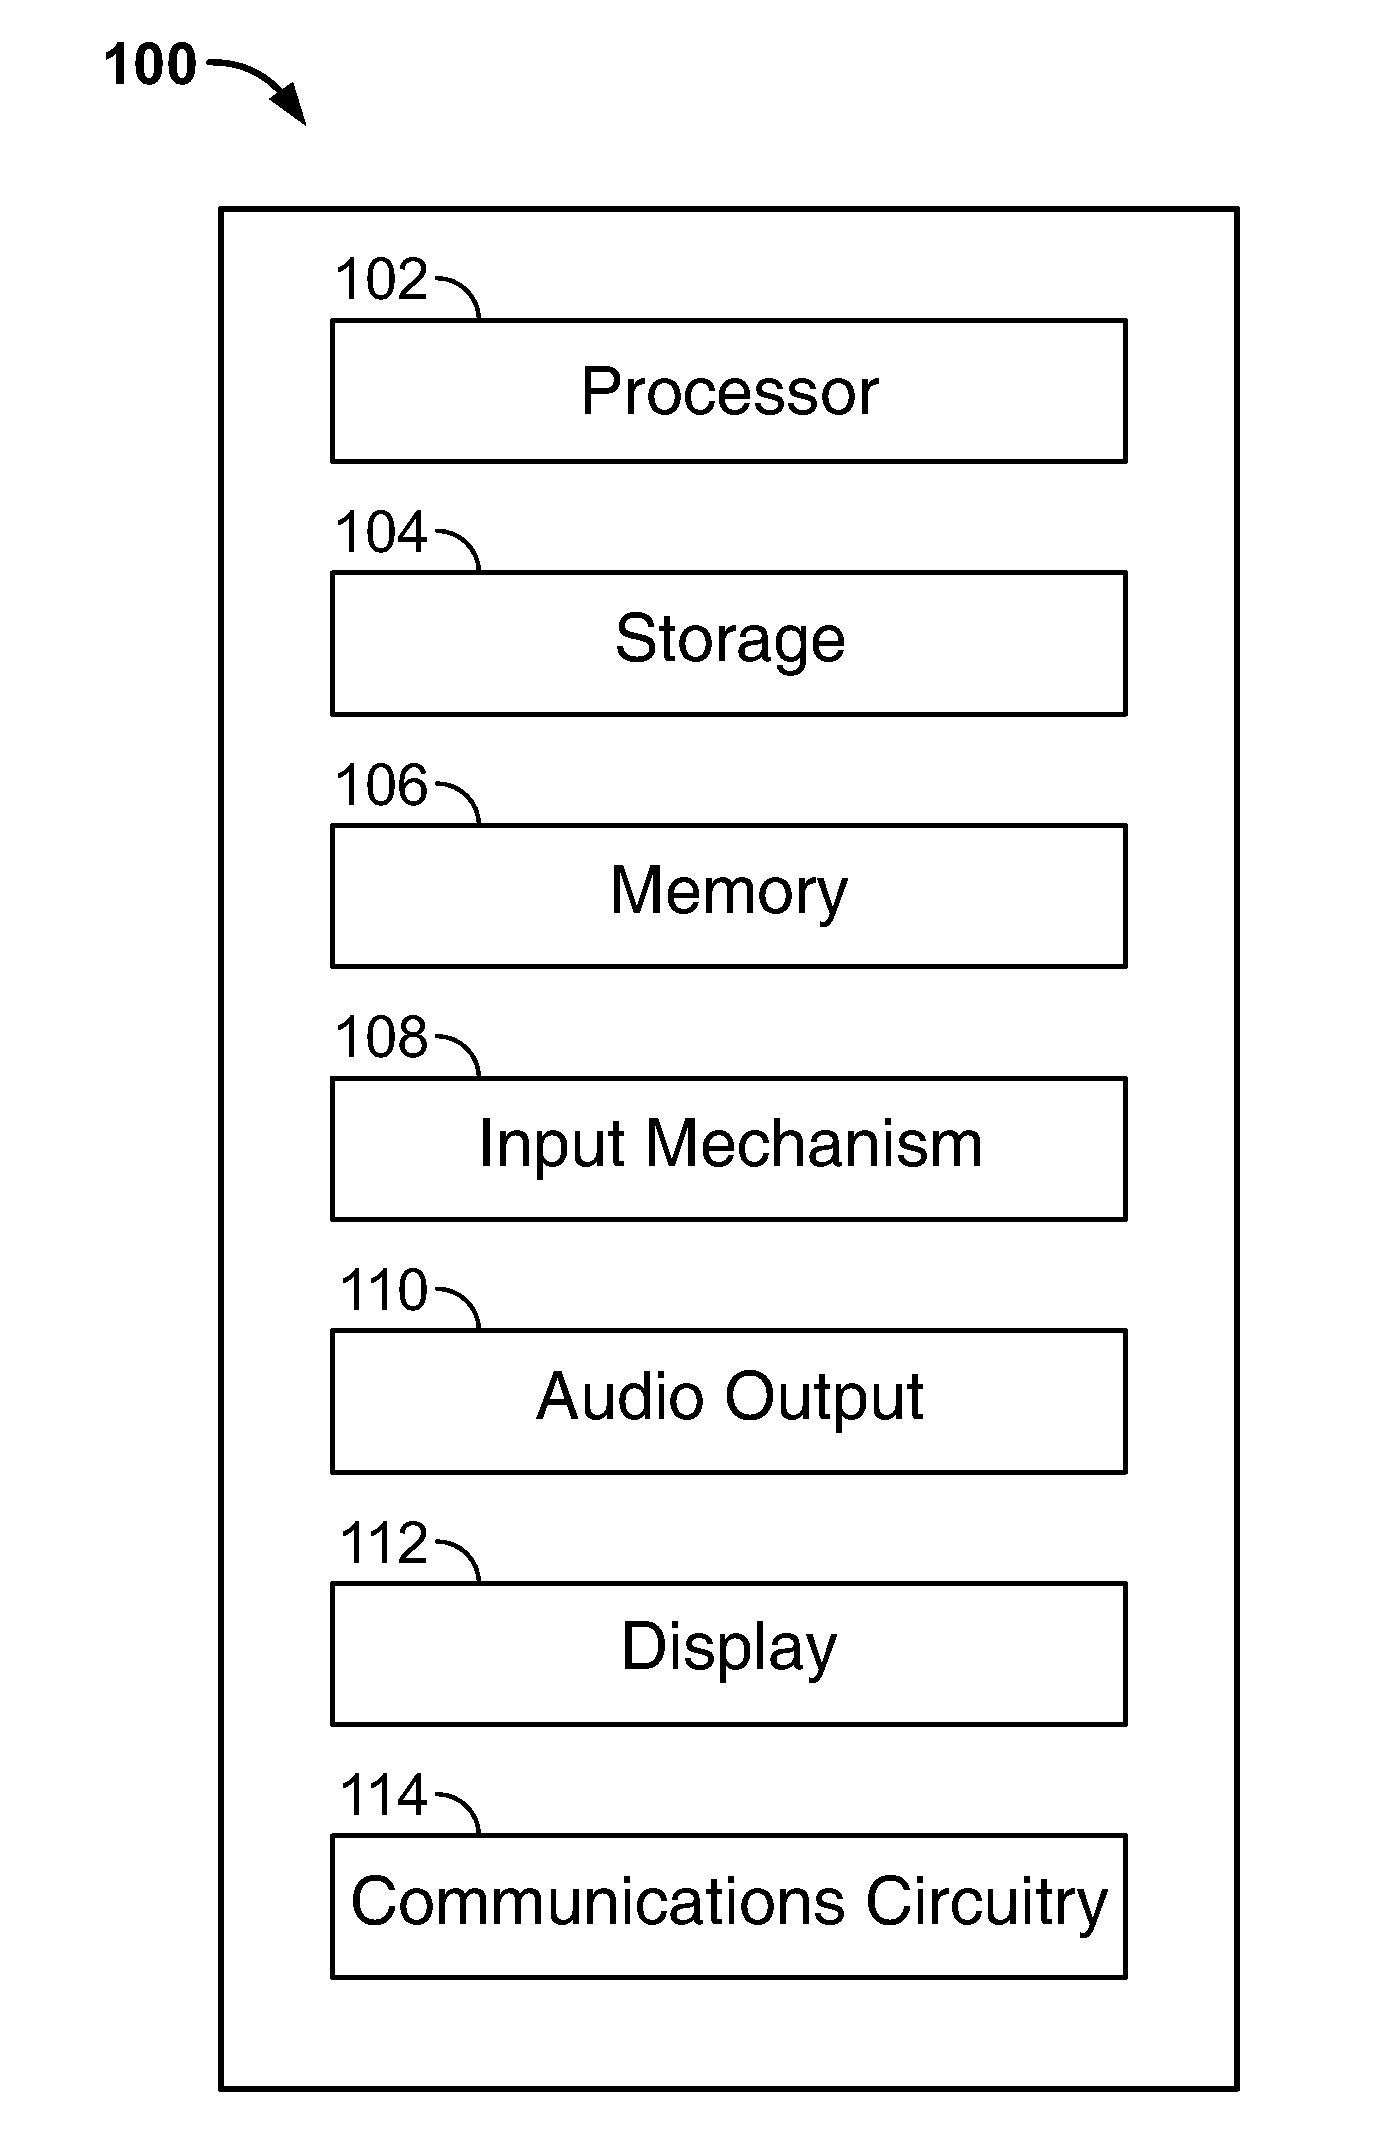 Multi-Tiered Voice Feedback in an Electronic Device